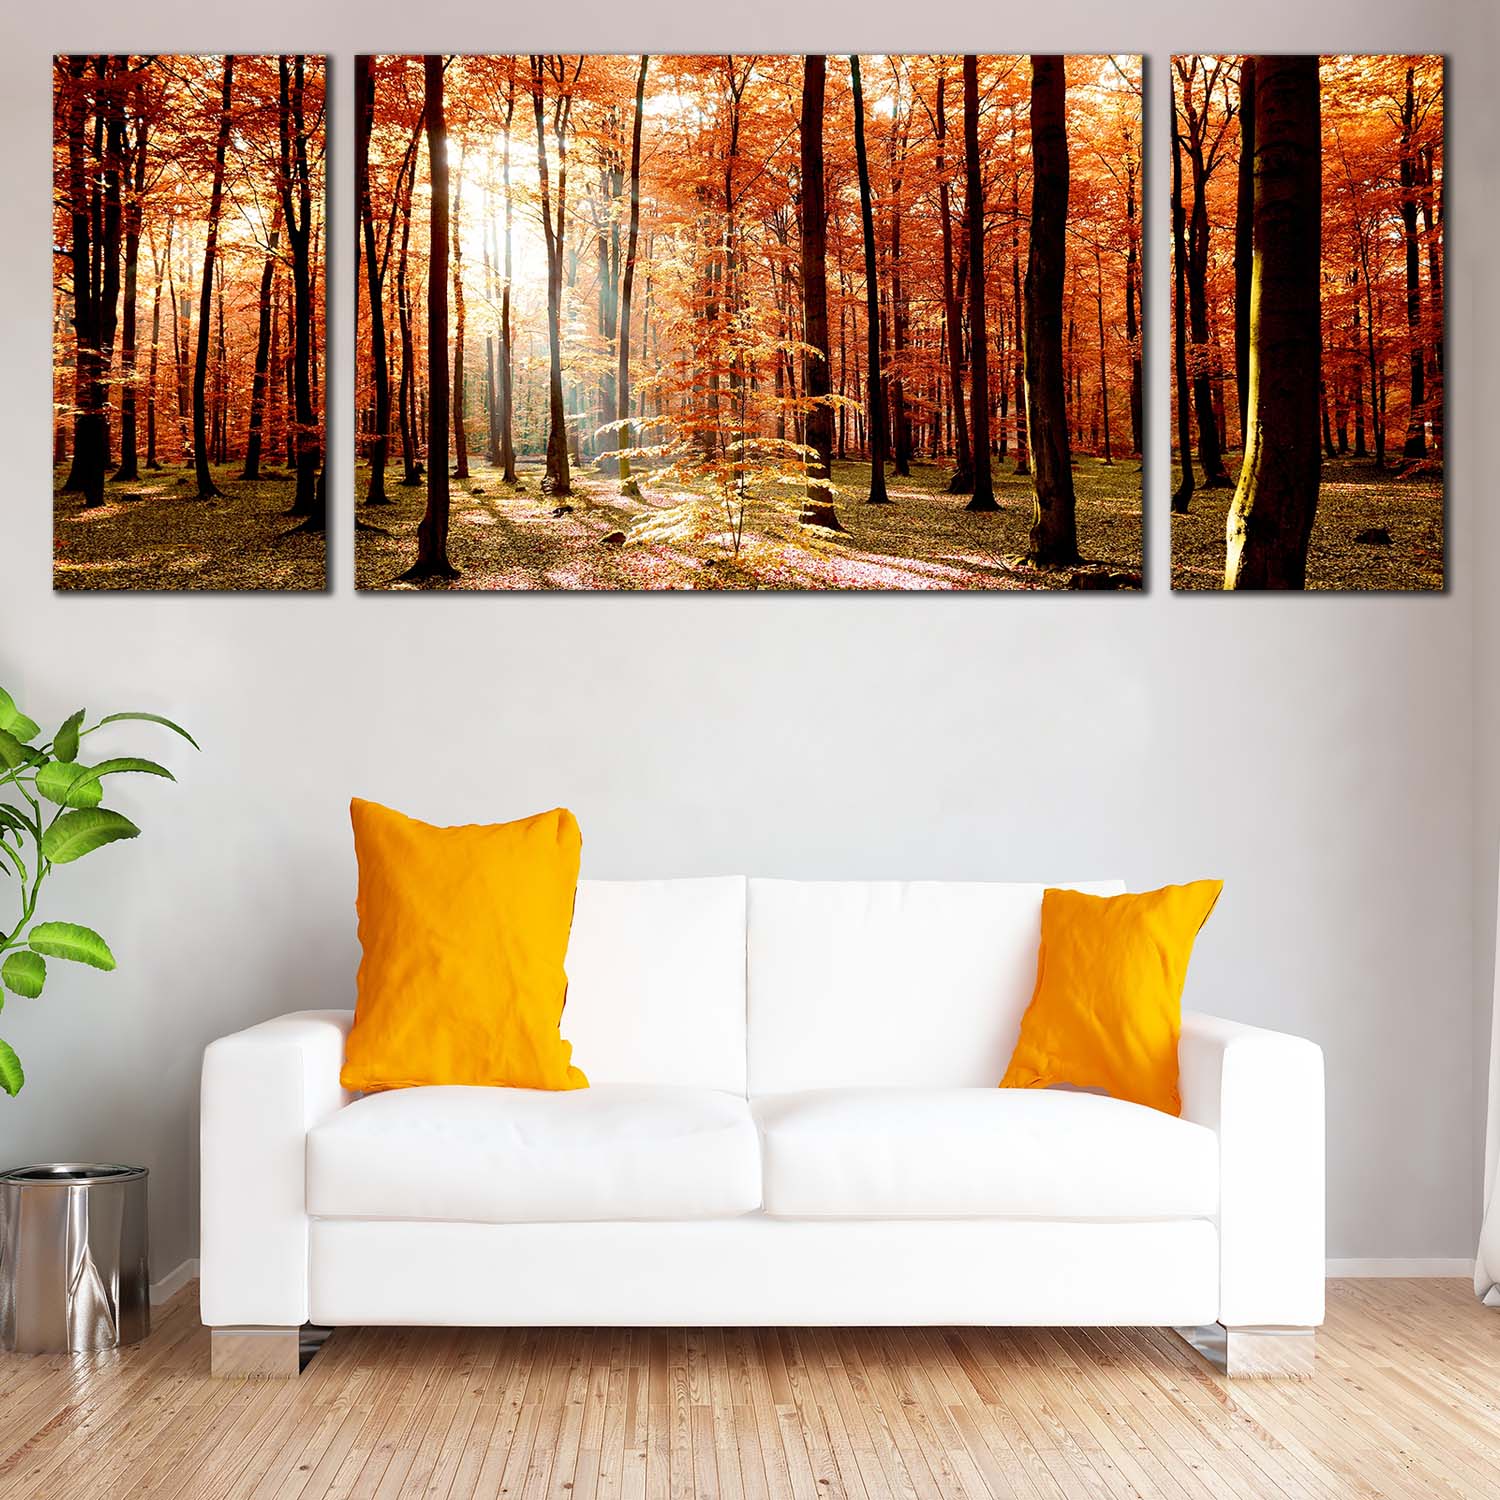 Forest Scenery Canvas Print, Orange Autumn Trees Sunrise Triptych Canv ...